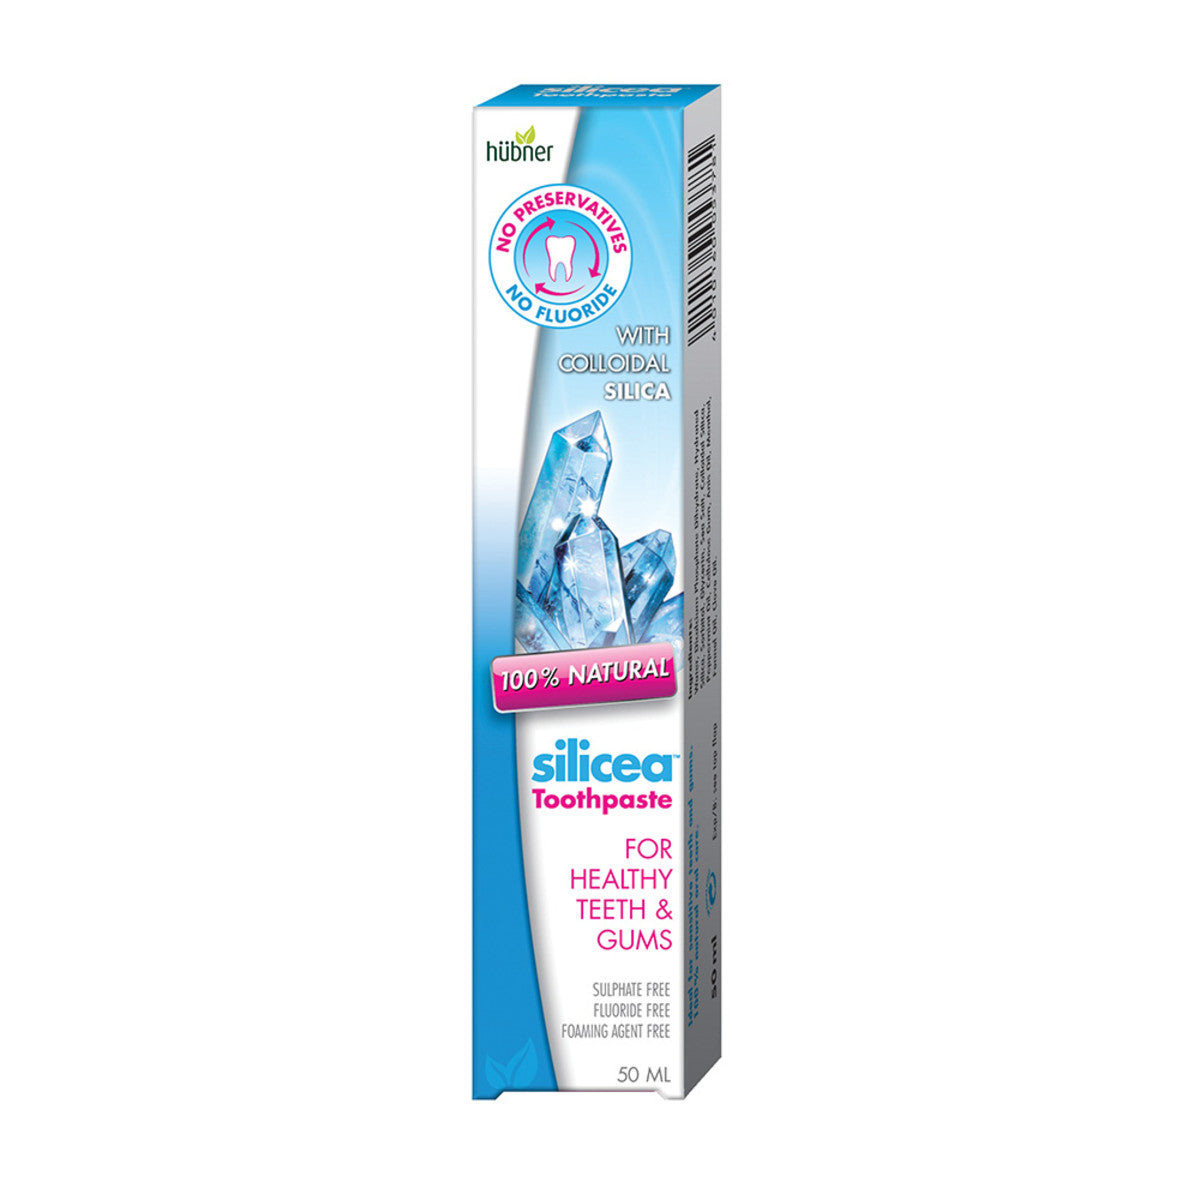 Hubner Silicea Body Essential Toothpaste 50ml